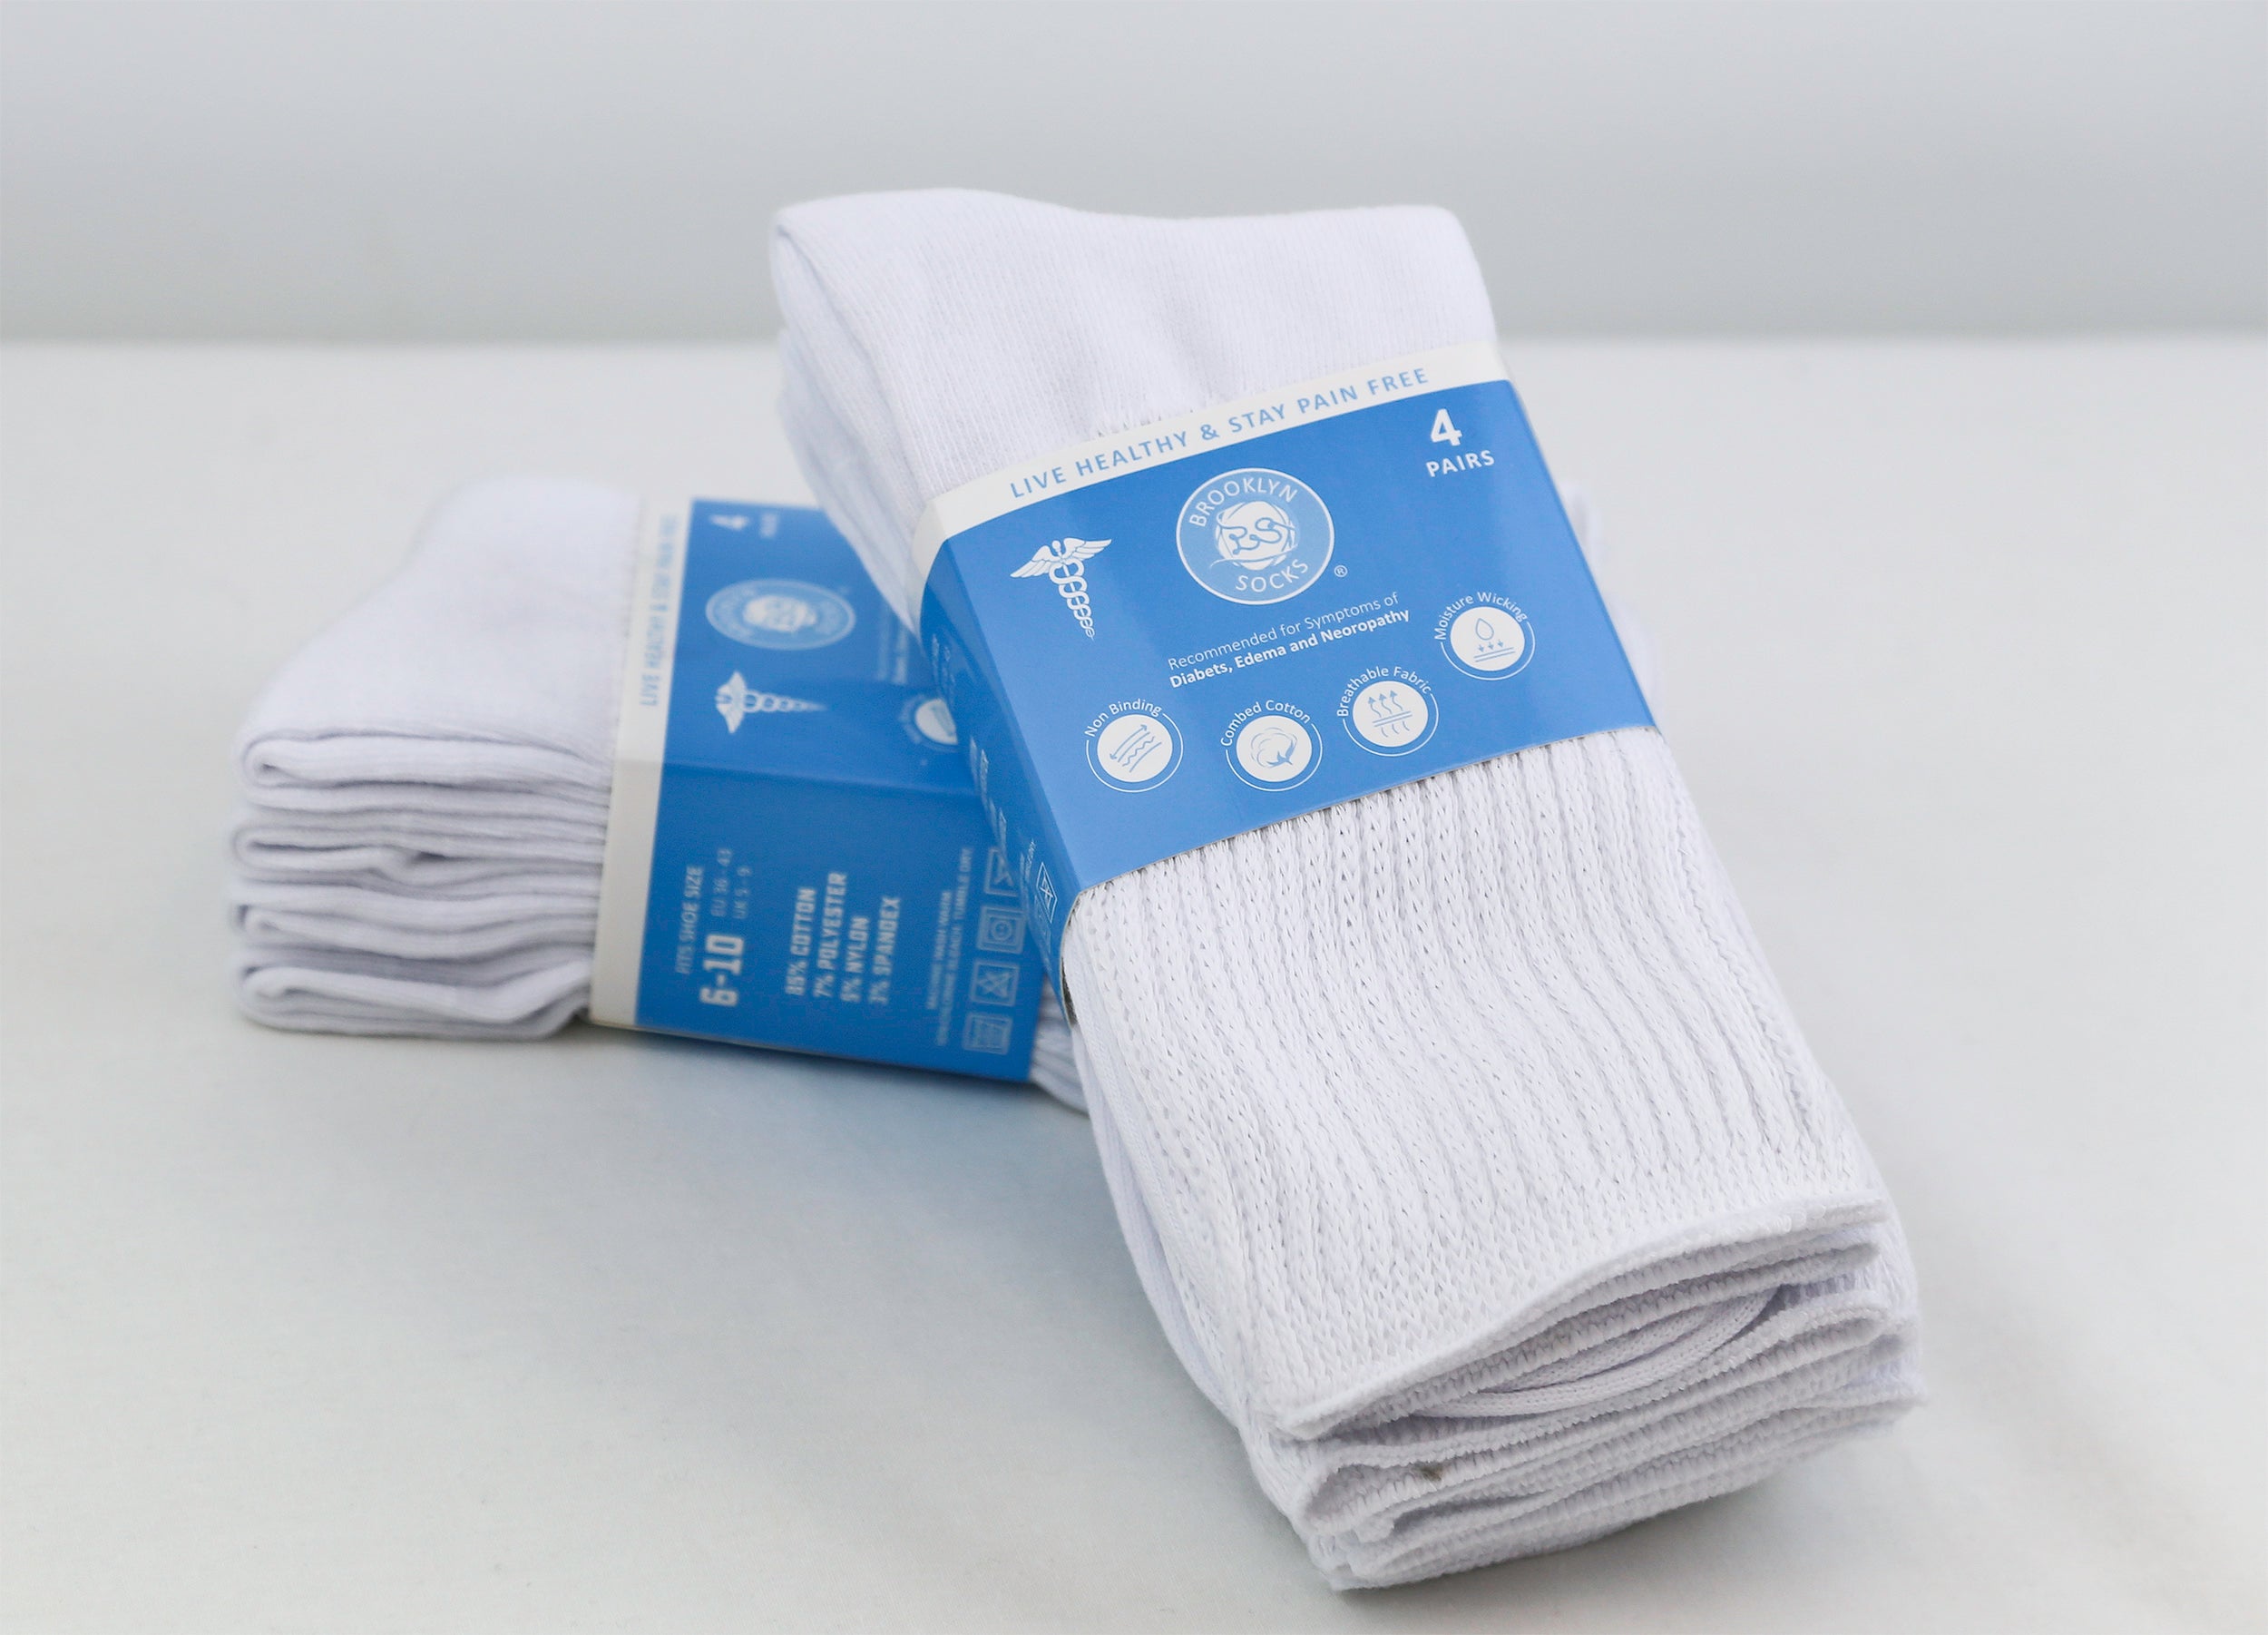 Thin Combed Cotton Diabetic Socks, Loose, Wide, Non-Binding Low-Crew Socks (Fits Shoe Size 7-11 )